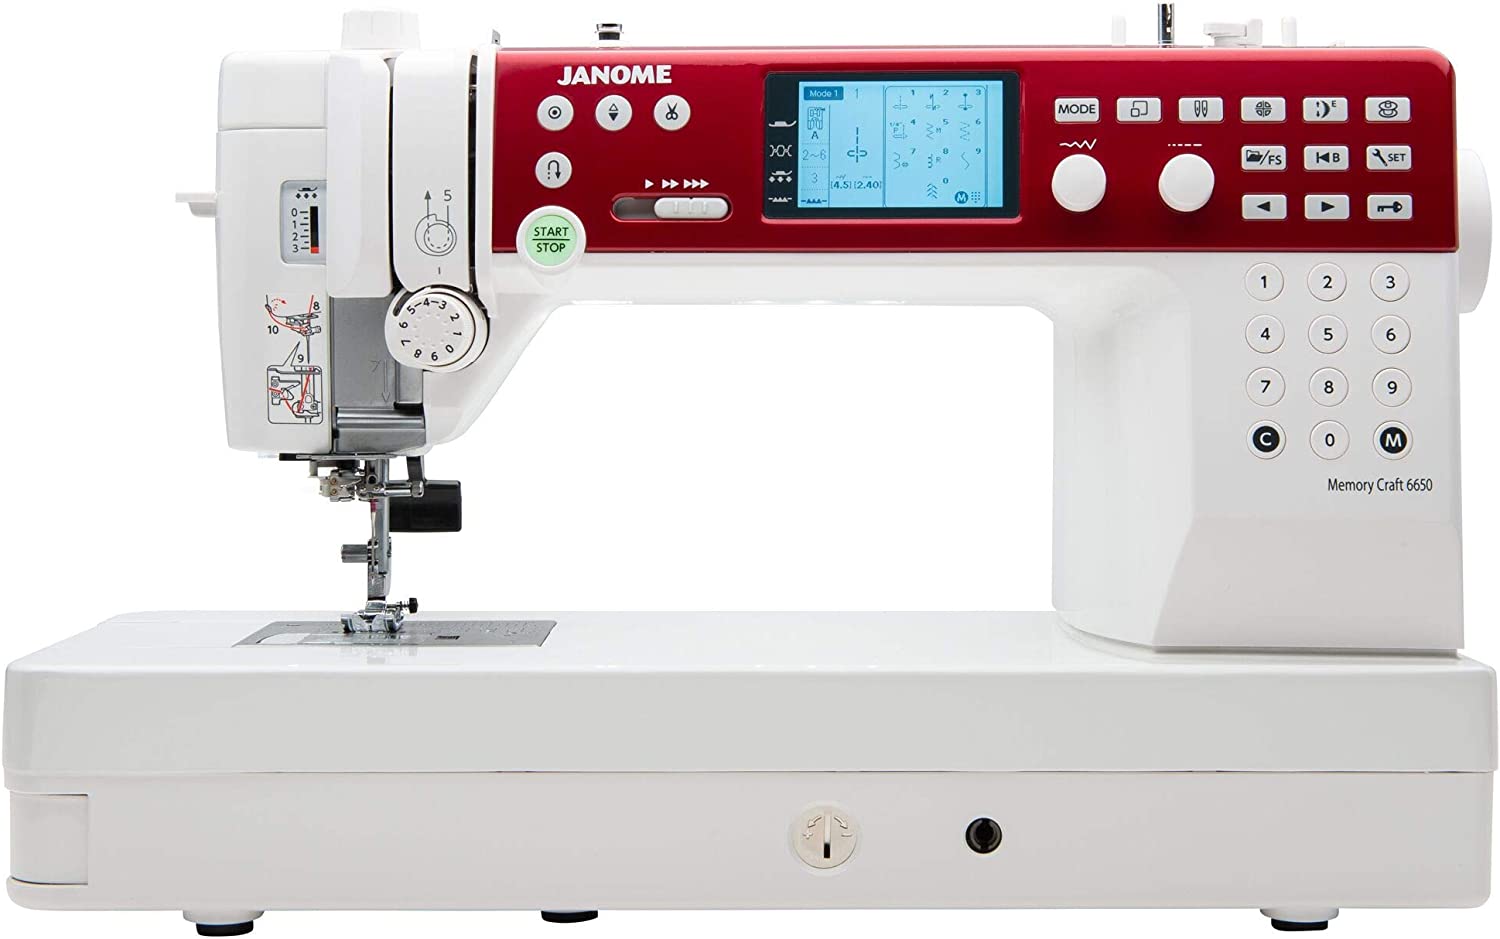 Janome-MC6650-Sewing-and-Quilting-Machine